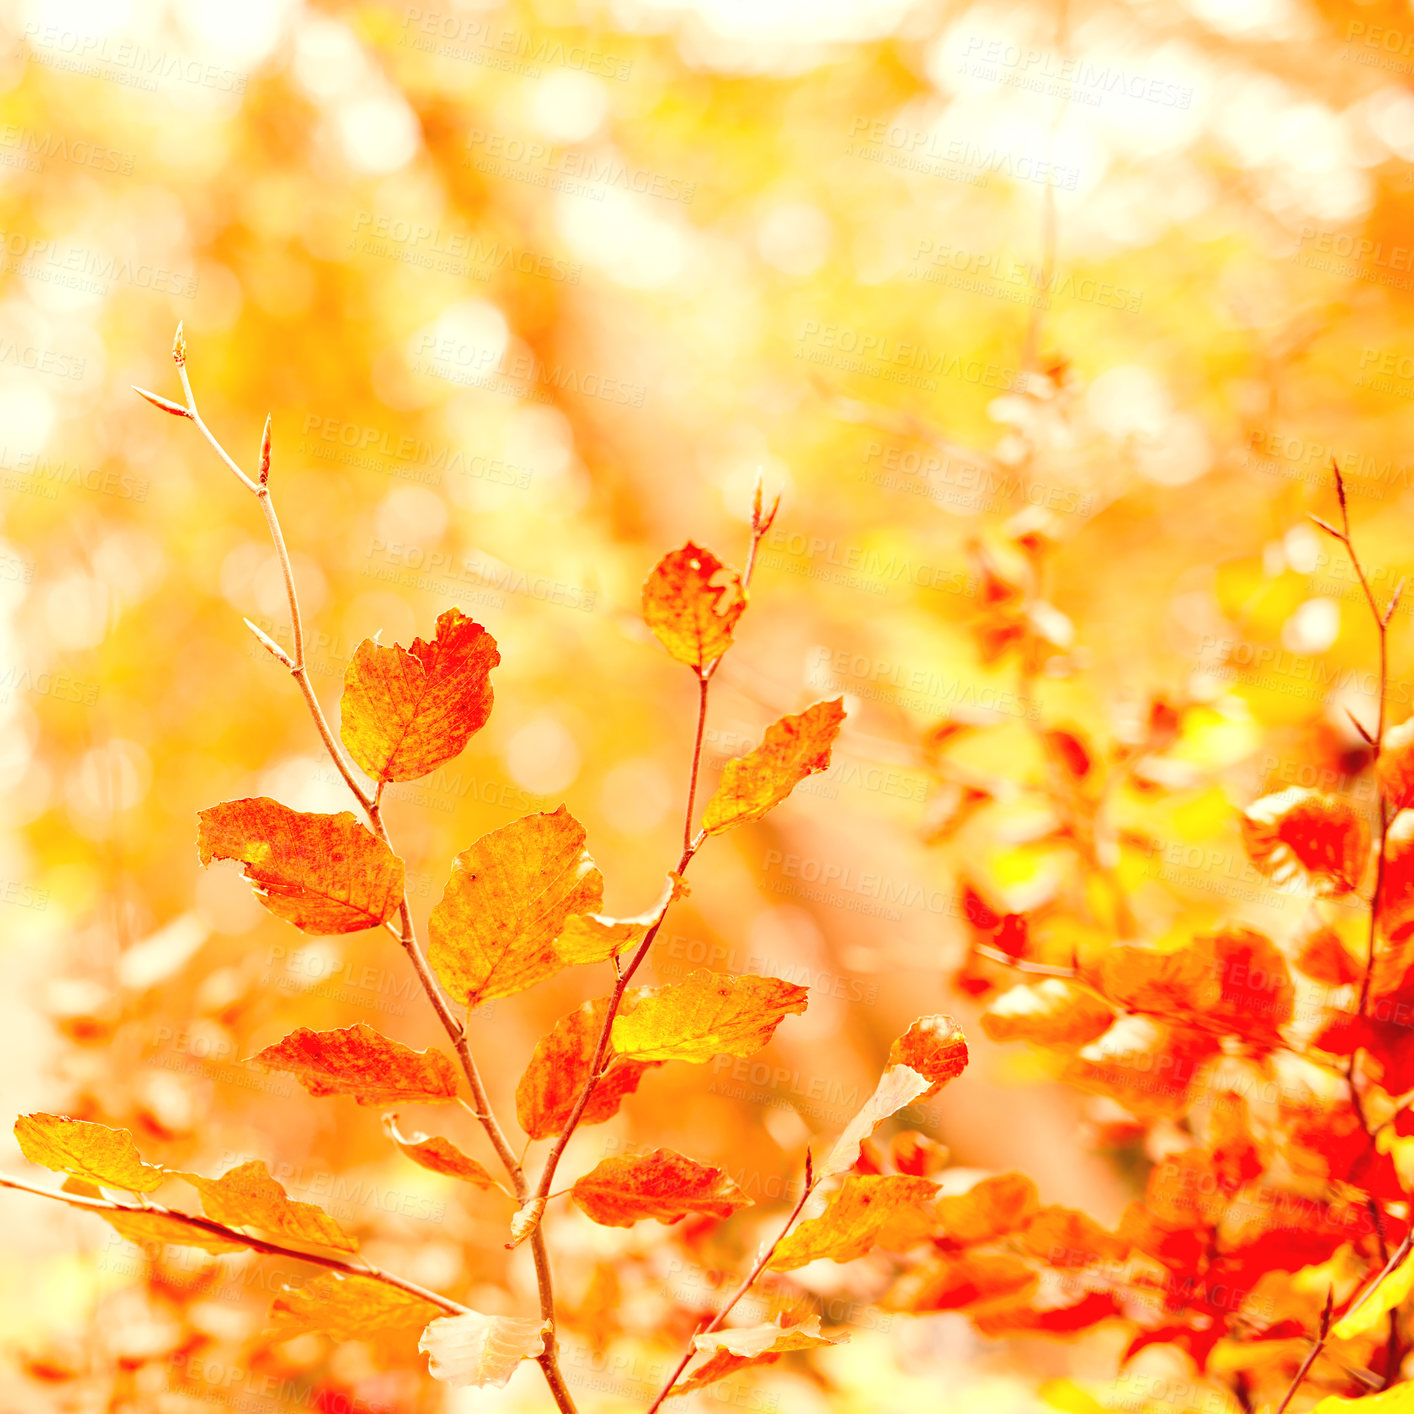 Buy stock photo Closeup of golden colors of autumn against soft sunset light with bokeh and copyspace. Zoom in on leaves growing on a branch in a field or garden. Details, texture and natures beautiful leafy pattern